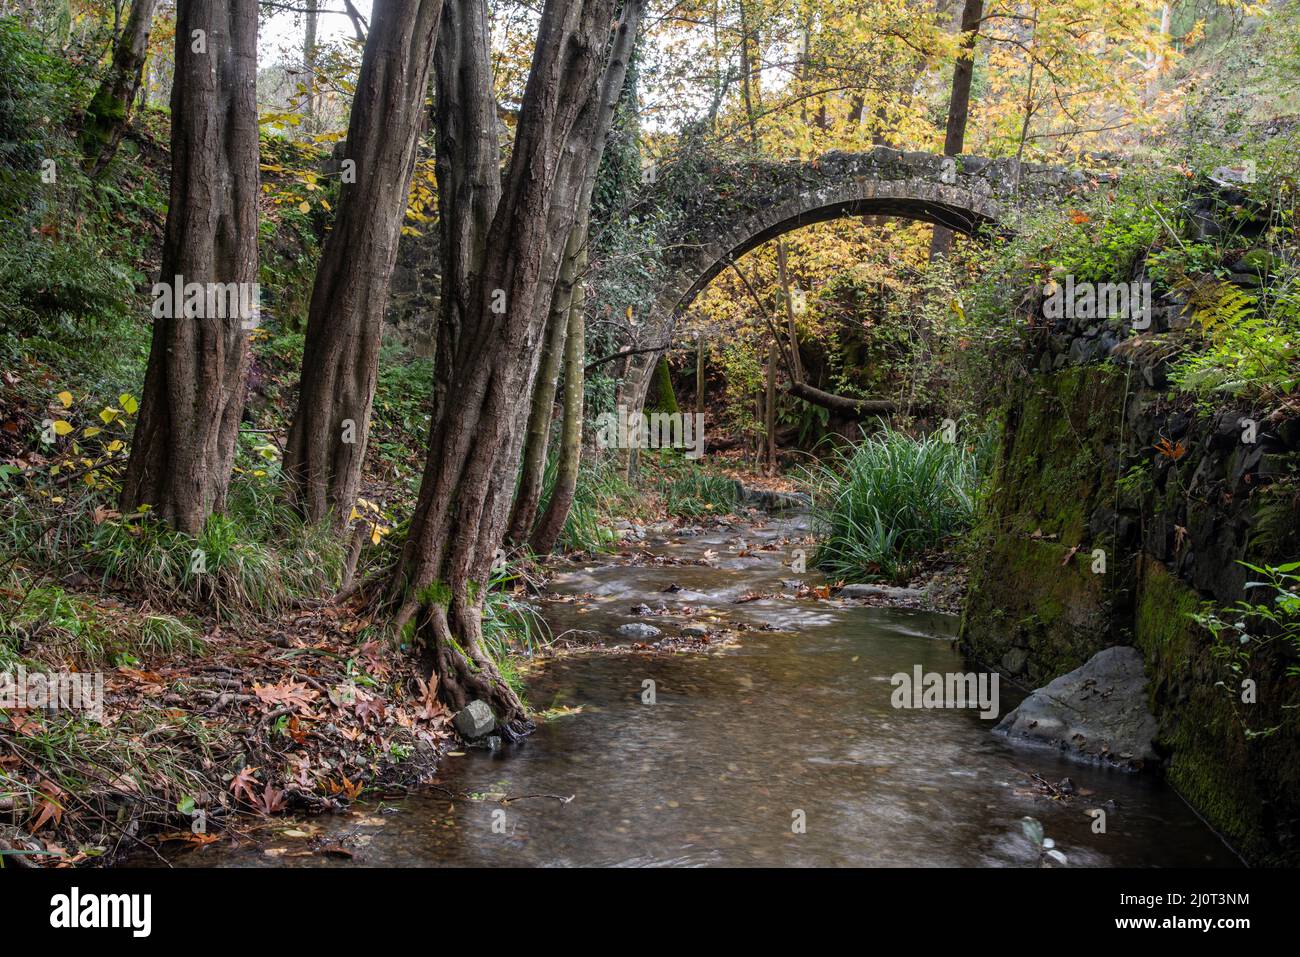 Autumn landscape in an ancient stoned bridge and yellow maple leaves on trees and ground. Stock Photo